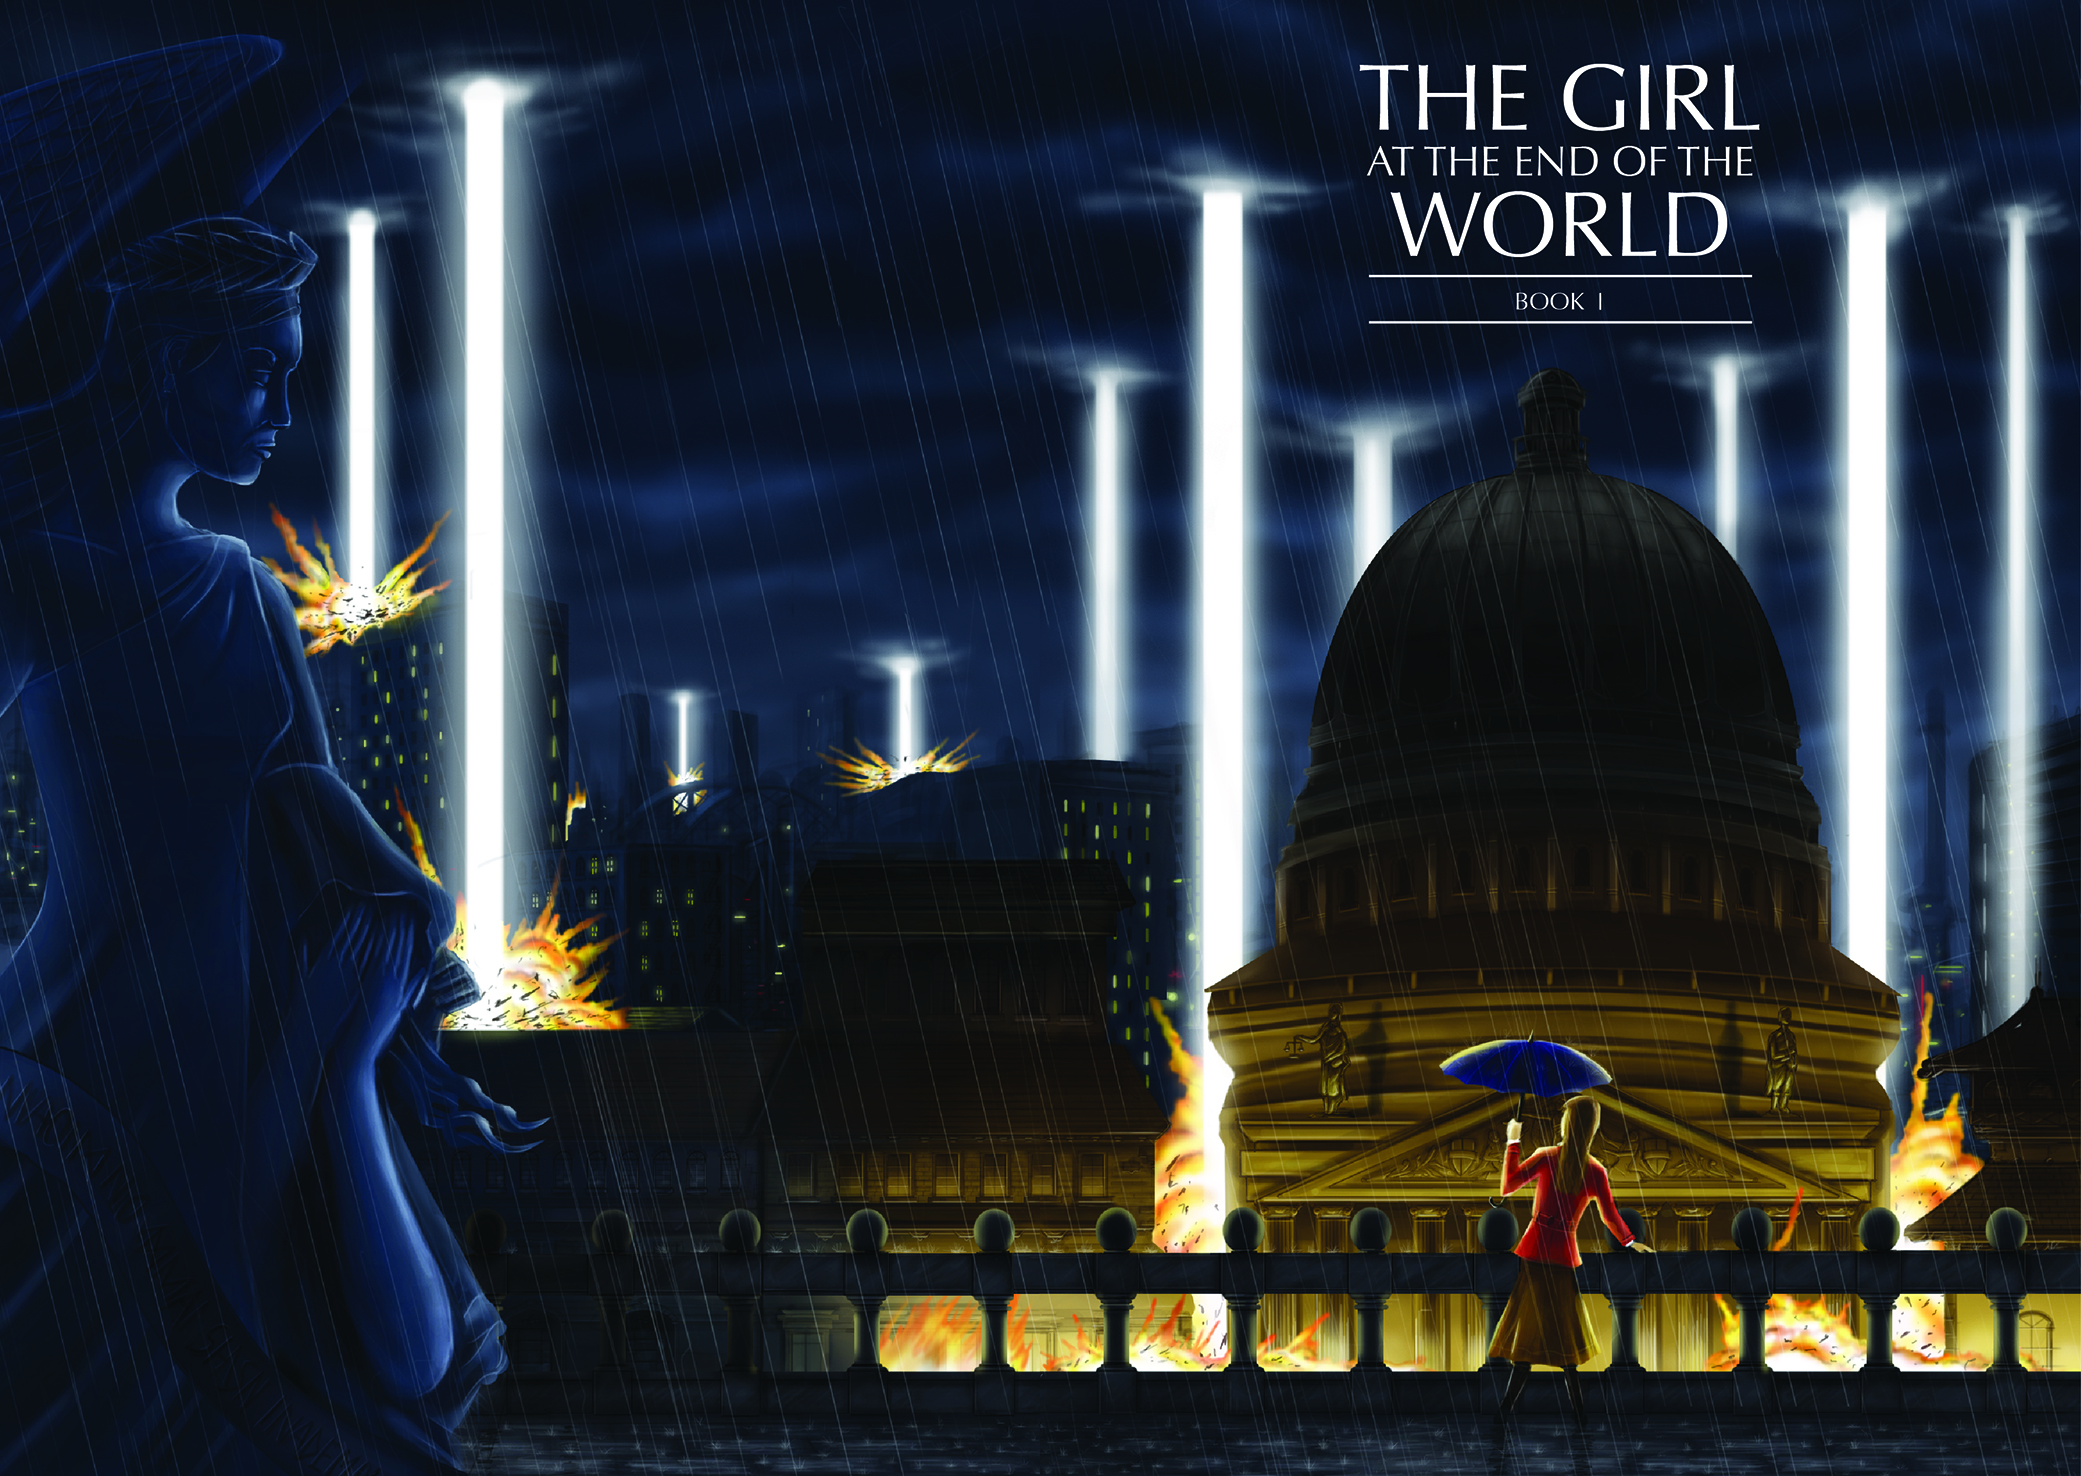 The Girl at the End of the Wold Vol 1 by Various